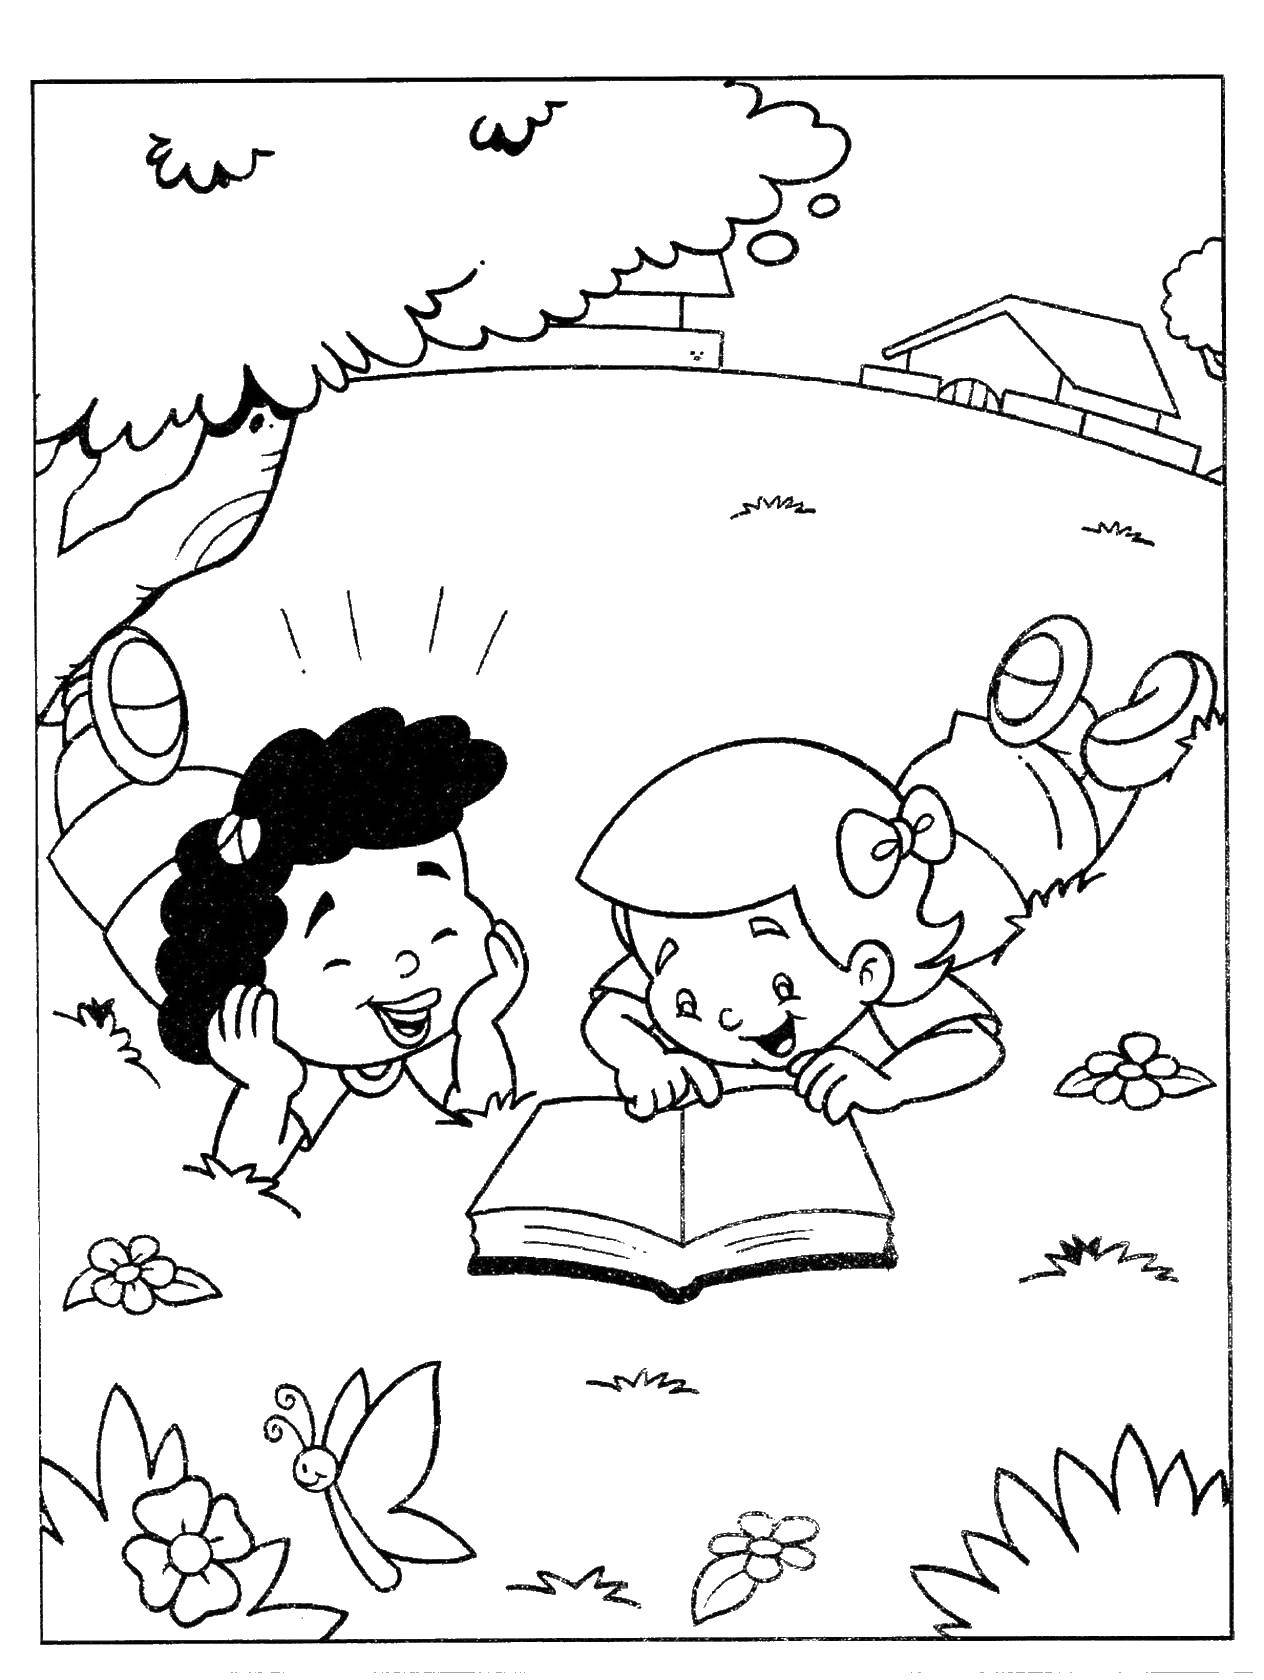 Coloring Children read a book in a meadow. Category Nature. Tags:  children, book, meadow.